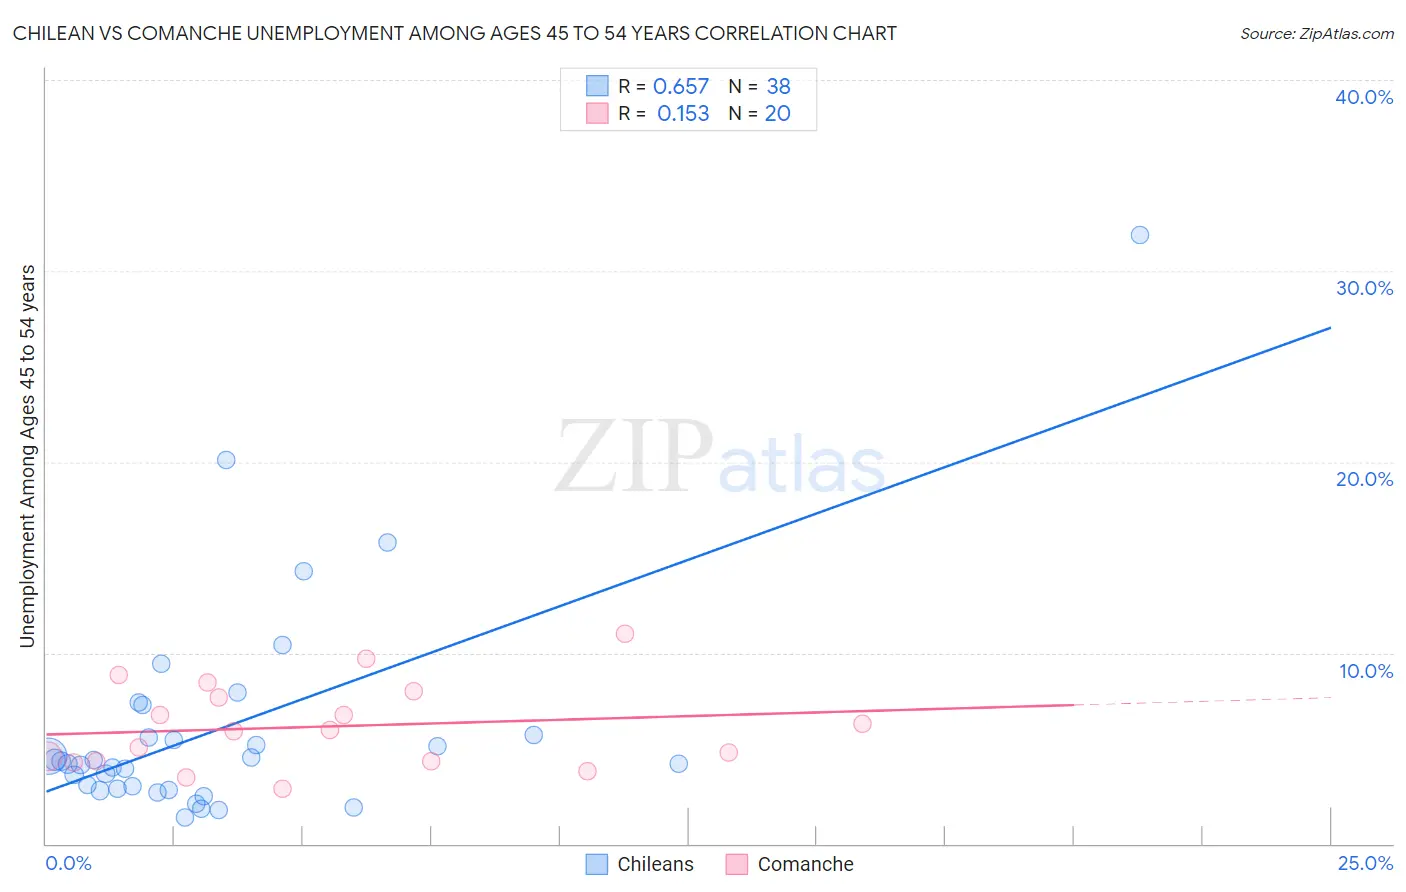 Chilean vs Comanche Unemployment Among Ages 45 to 54 years